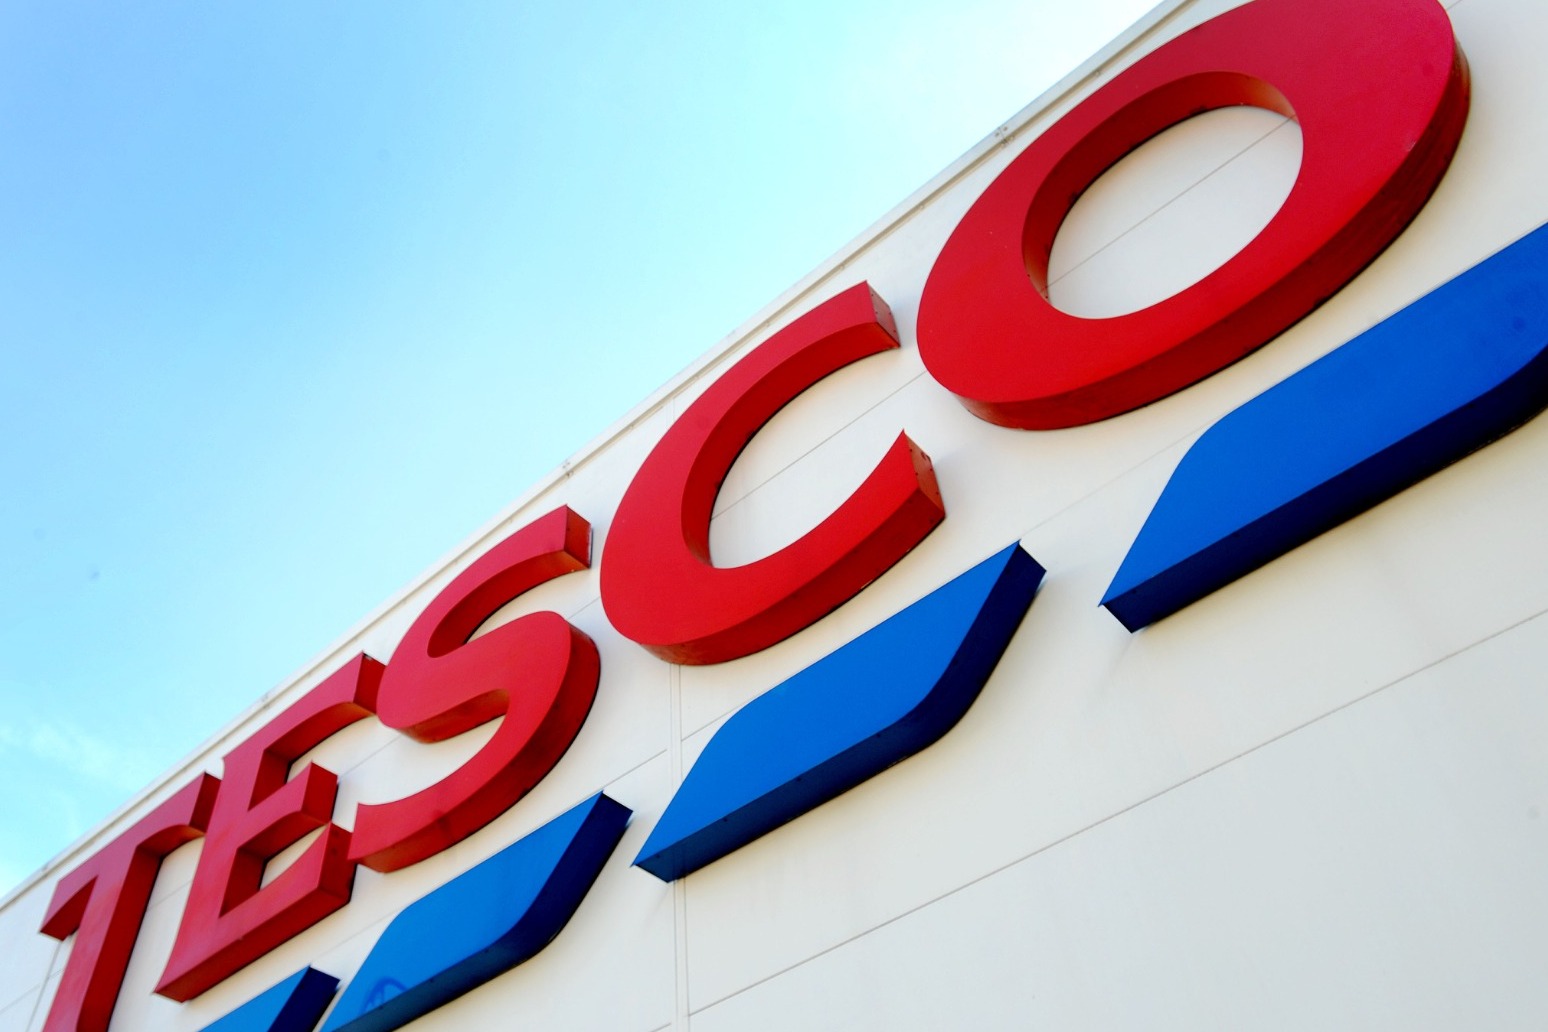 Tesco profits set to soar to £2.7bn but faces cost-of-living questions 